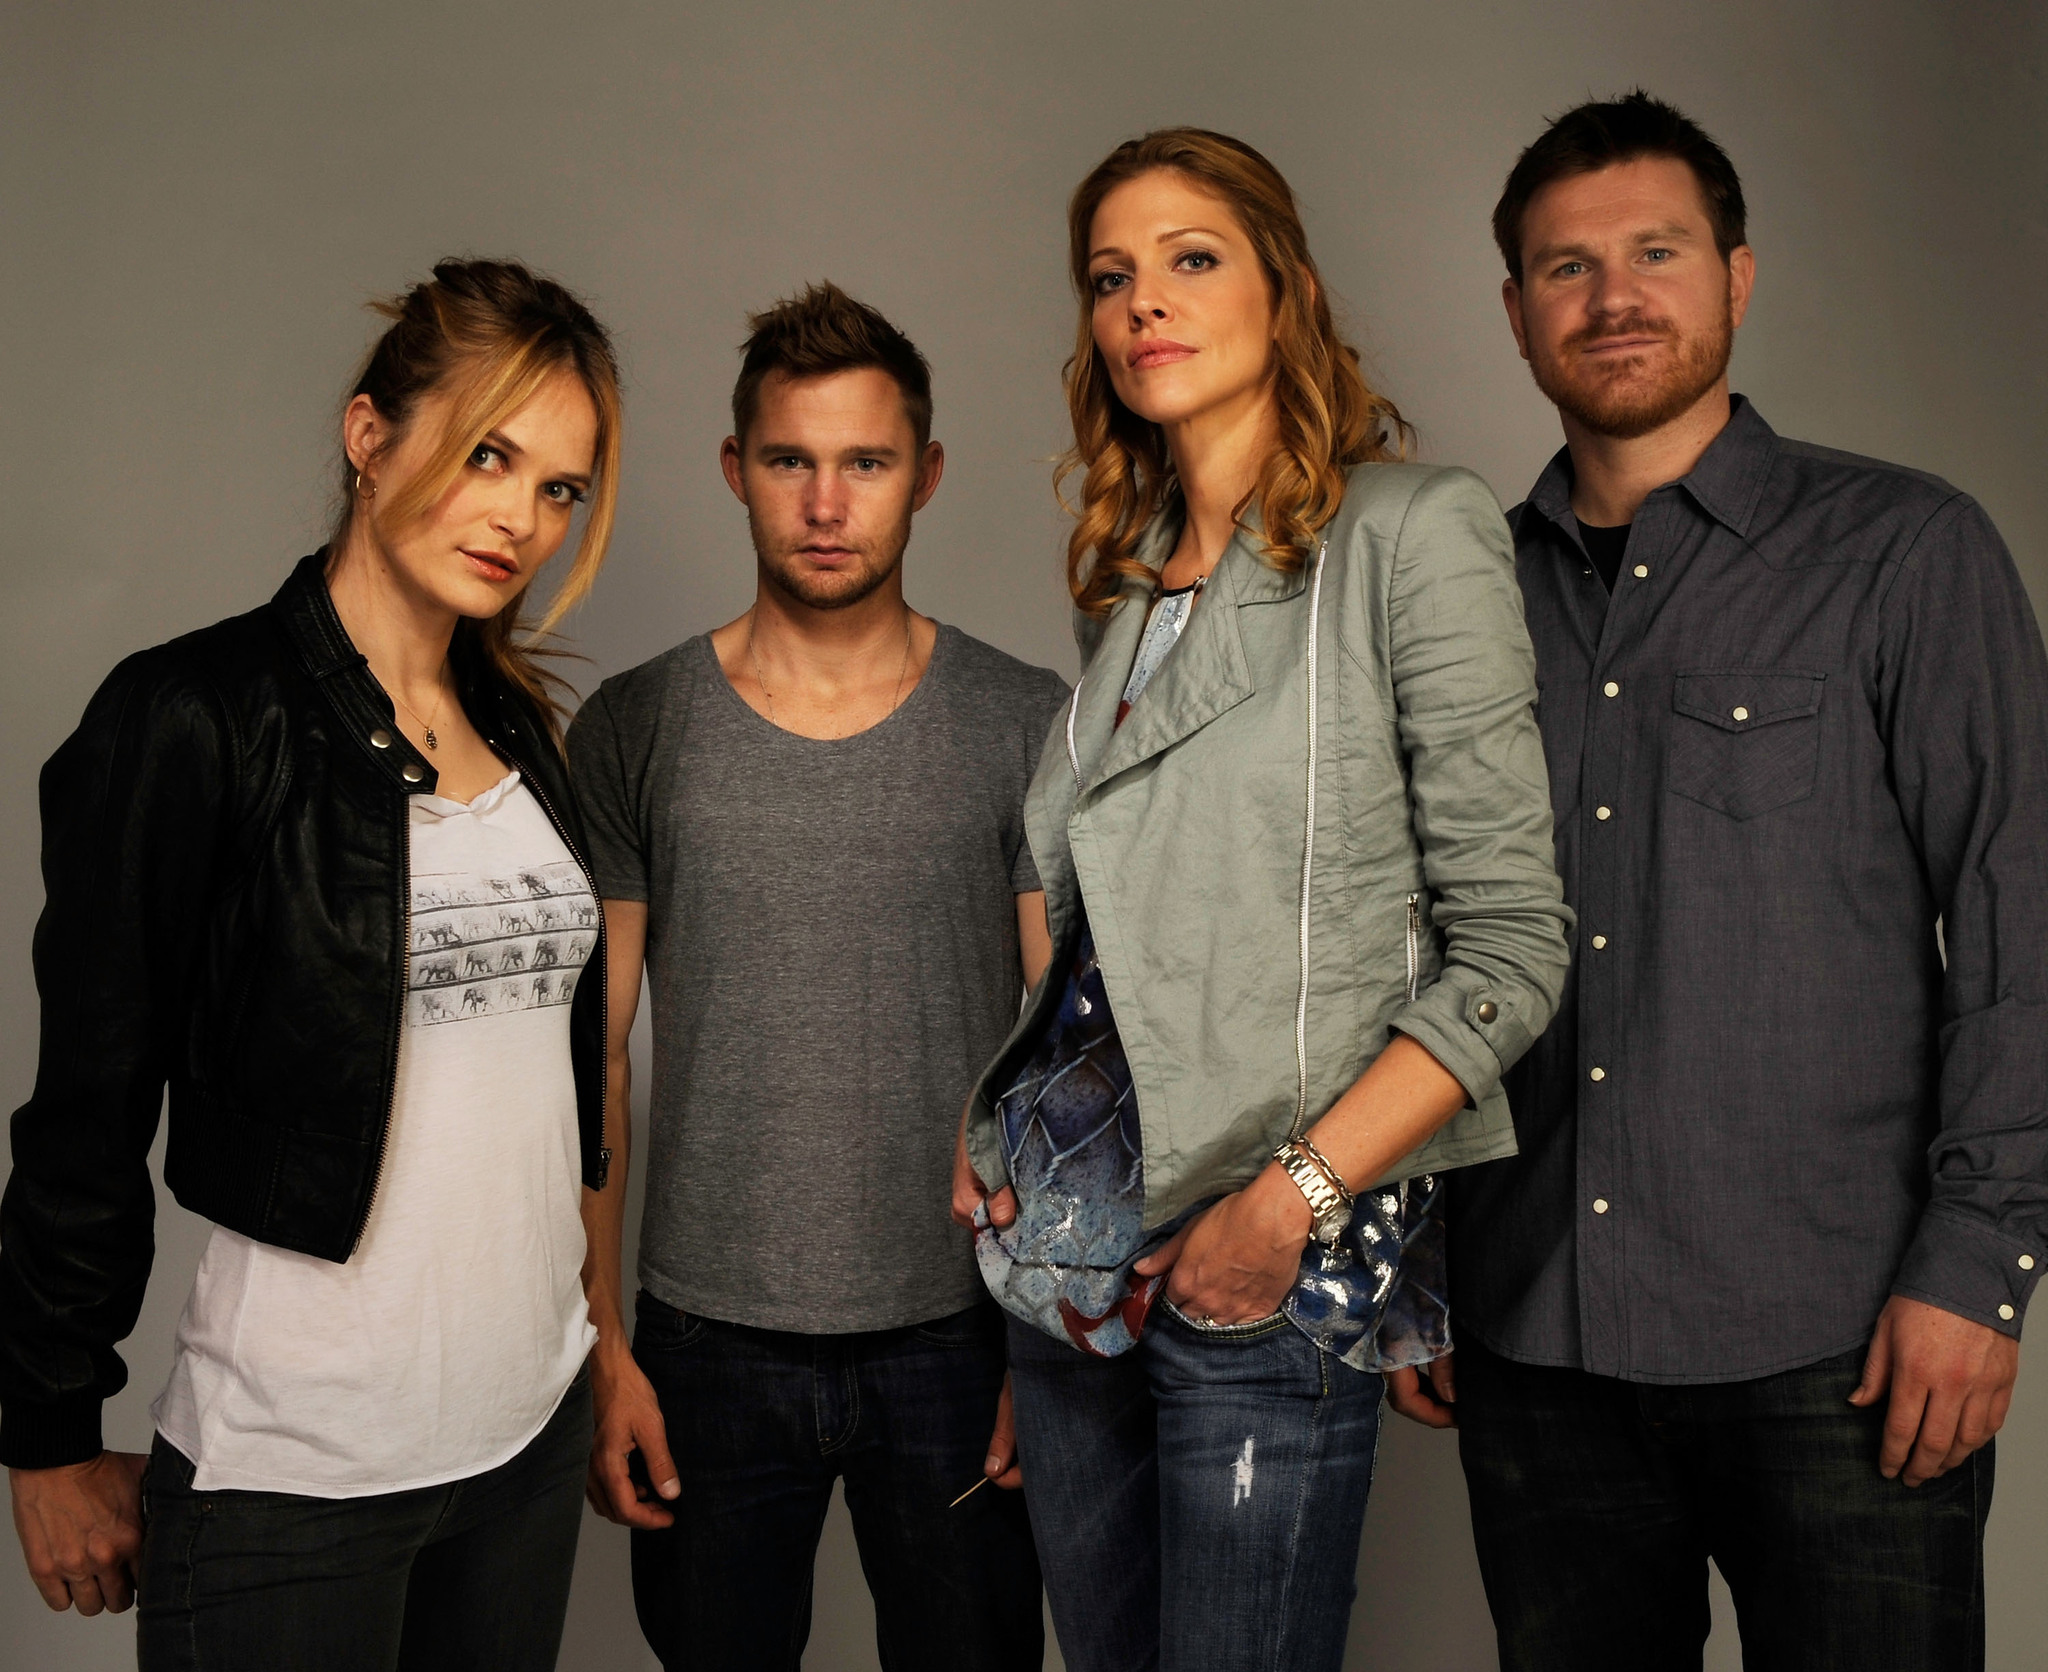 Rachel Blanchard, Tricia Helfer, Brian Geraghty and Andrew Paquin